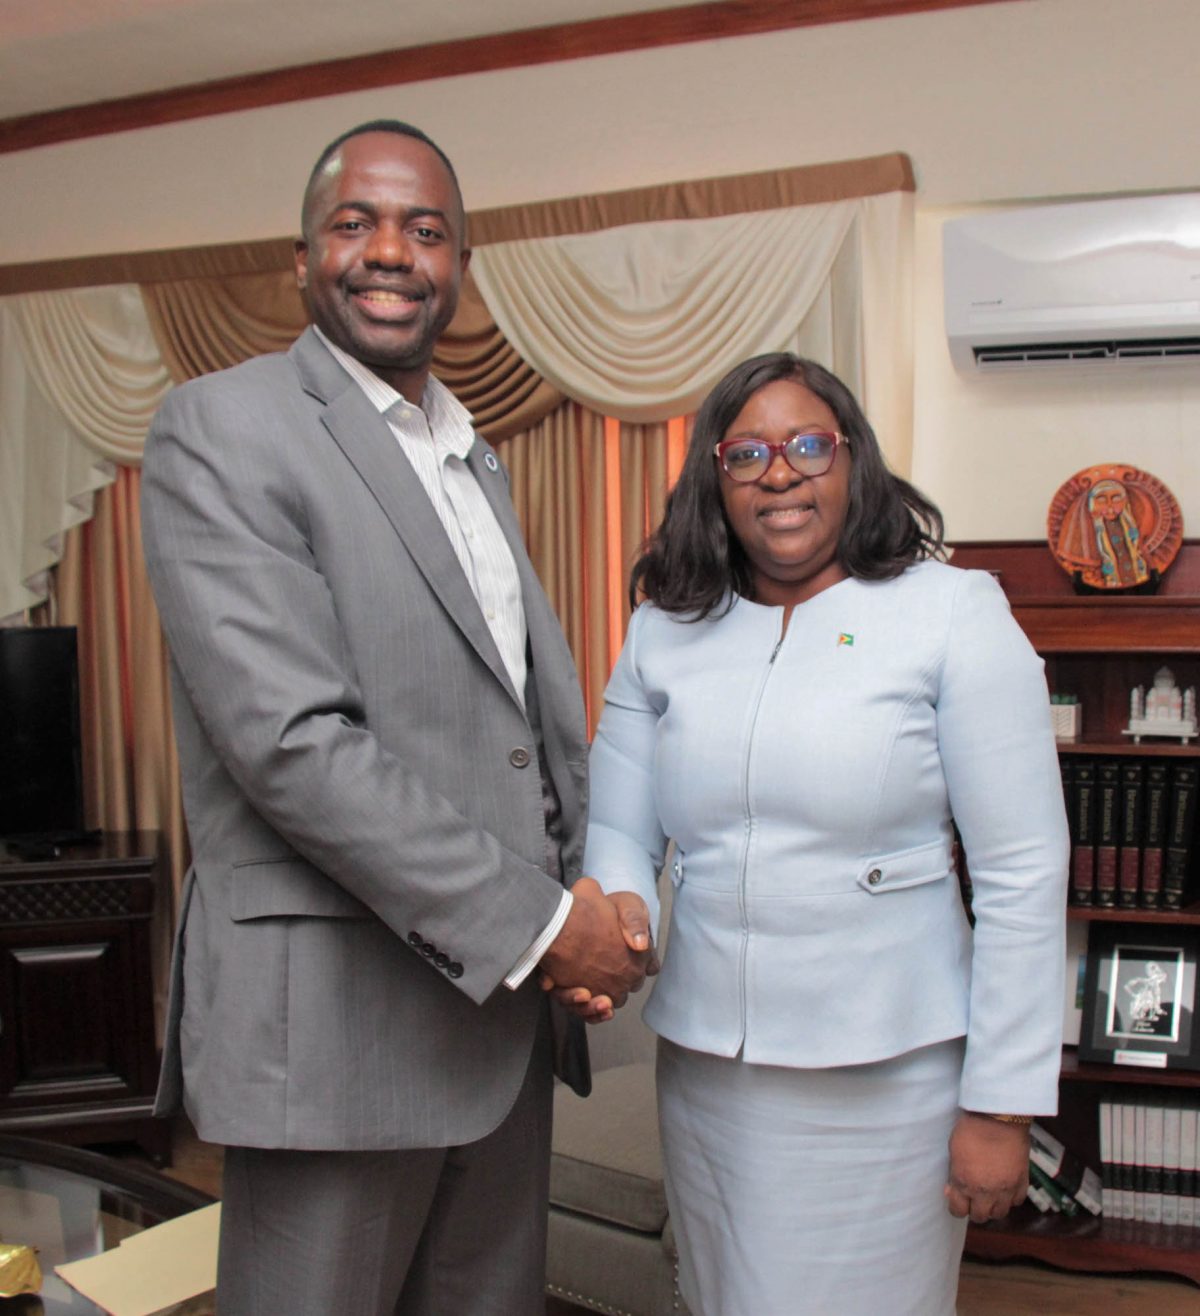 Mayor of Purcellville, Virginia, Kwasi Fraser,  paid a courtesy call on Minister of Foreign Affairs,  Dr Karen Cummings on November 13th last year.

